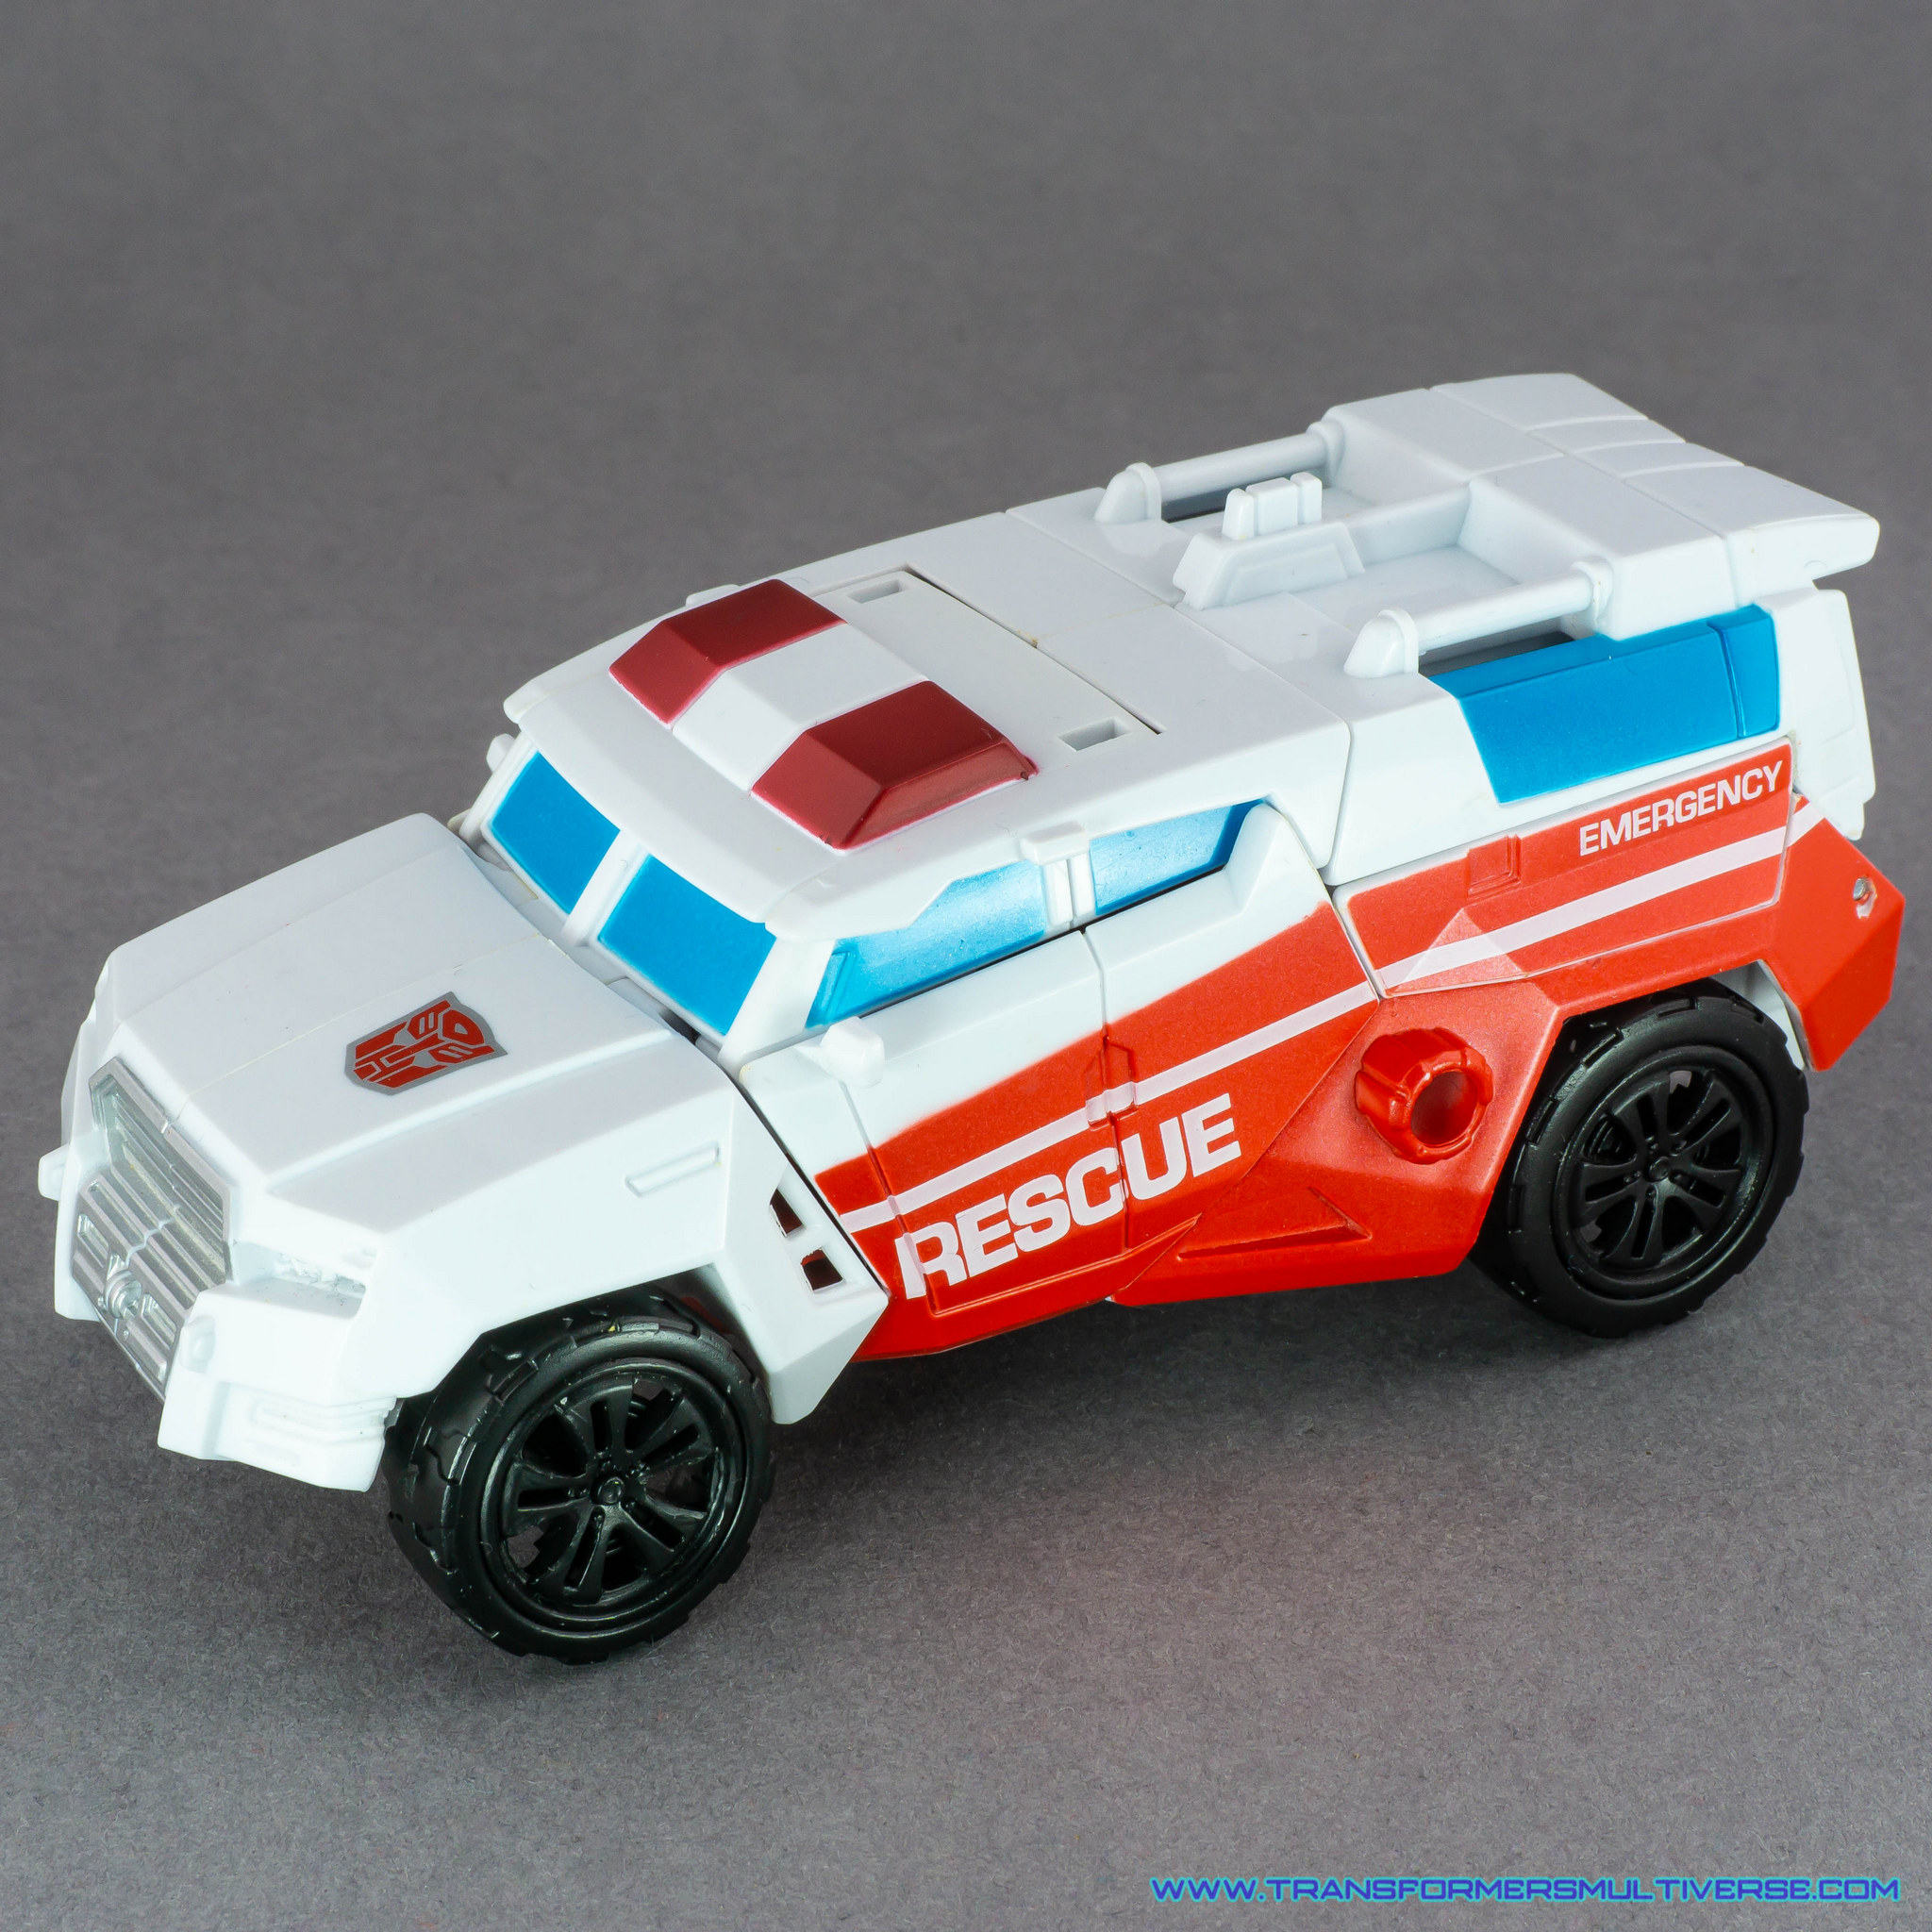 Transformers Combiner Wars First Aid Ambulance mode, alternate angle